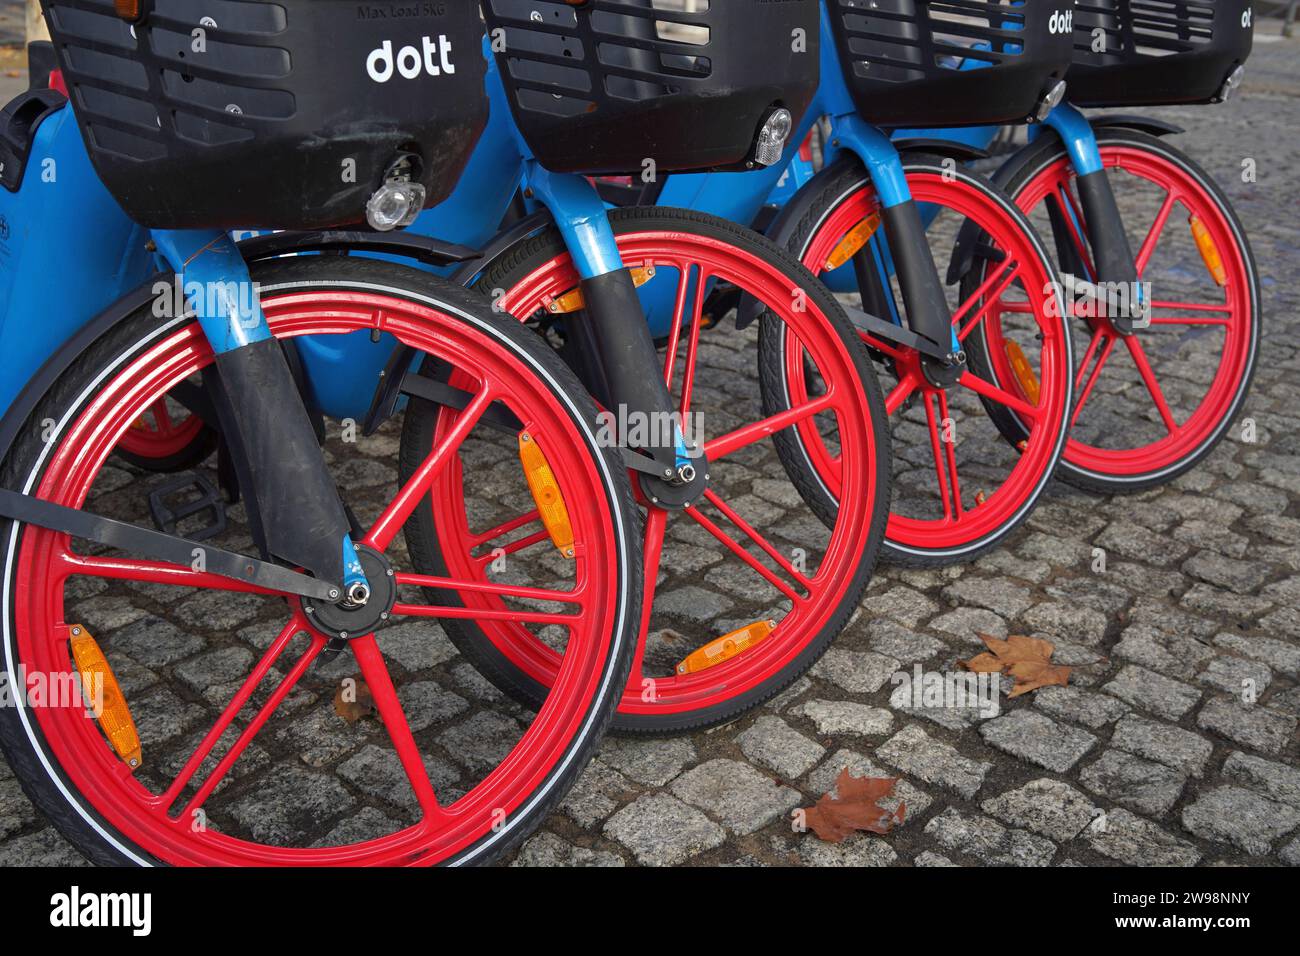 Public Bikes with red wheels lined up in public in Milan, Italy Stock Photo